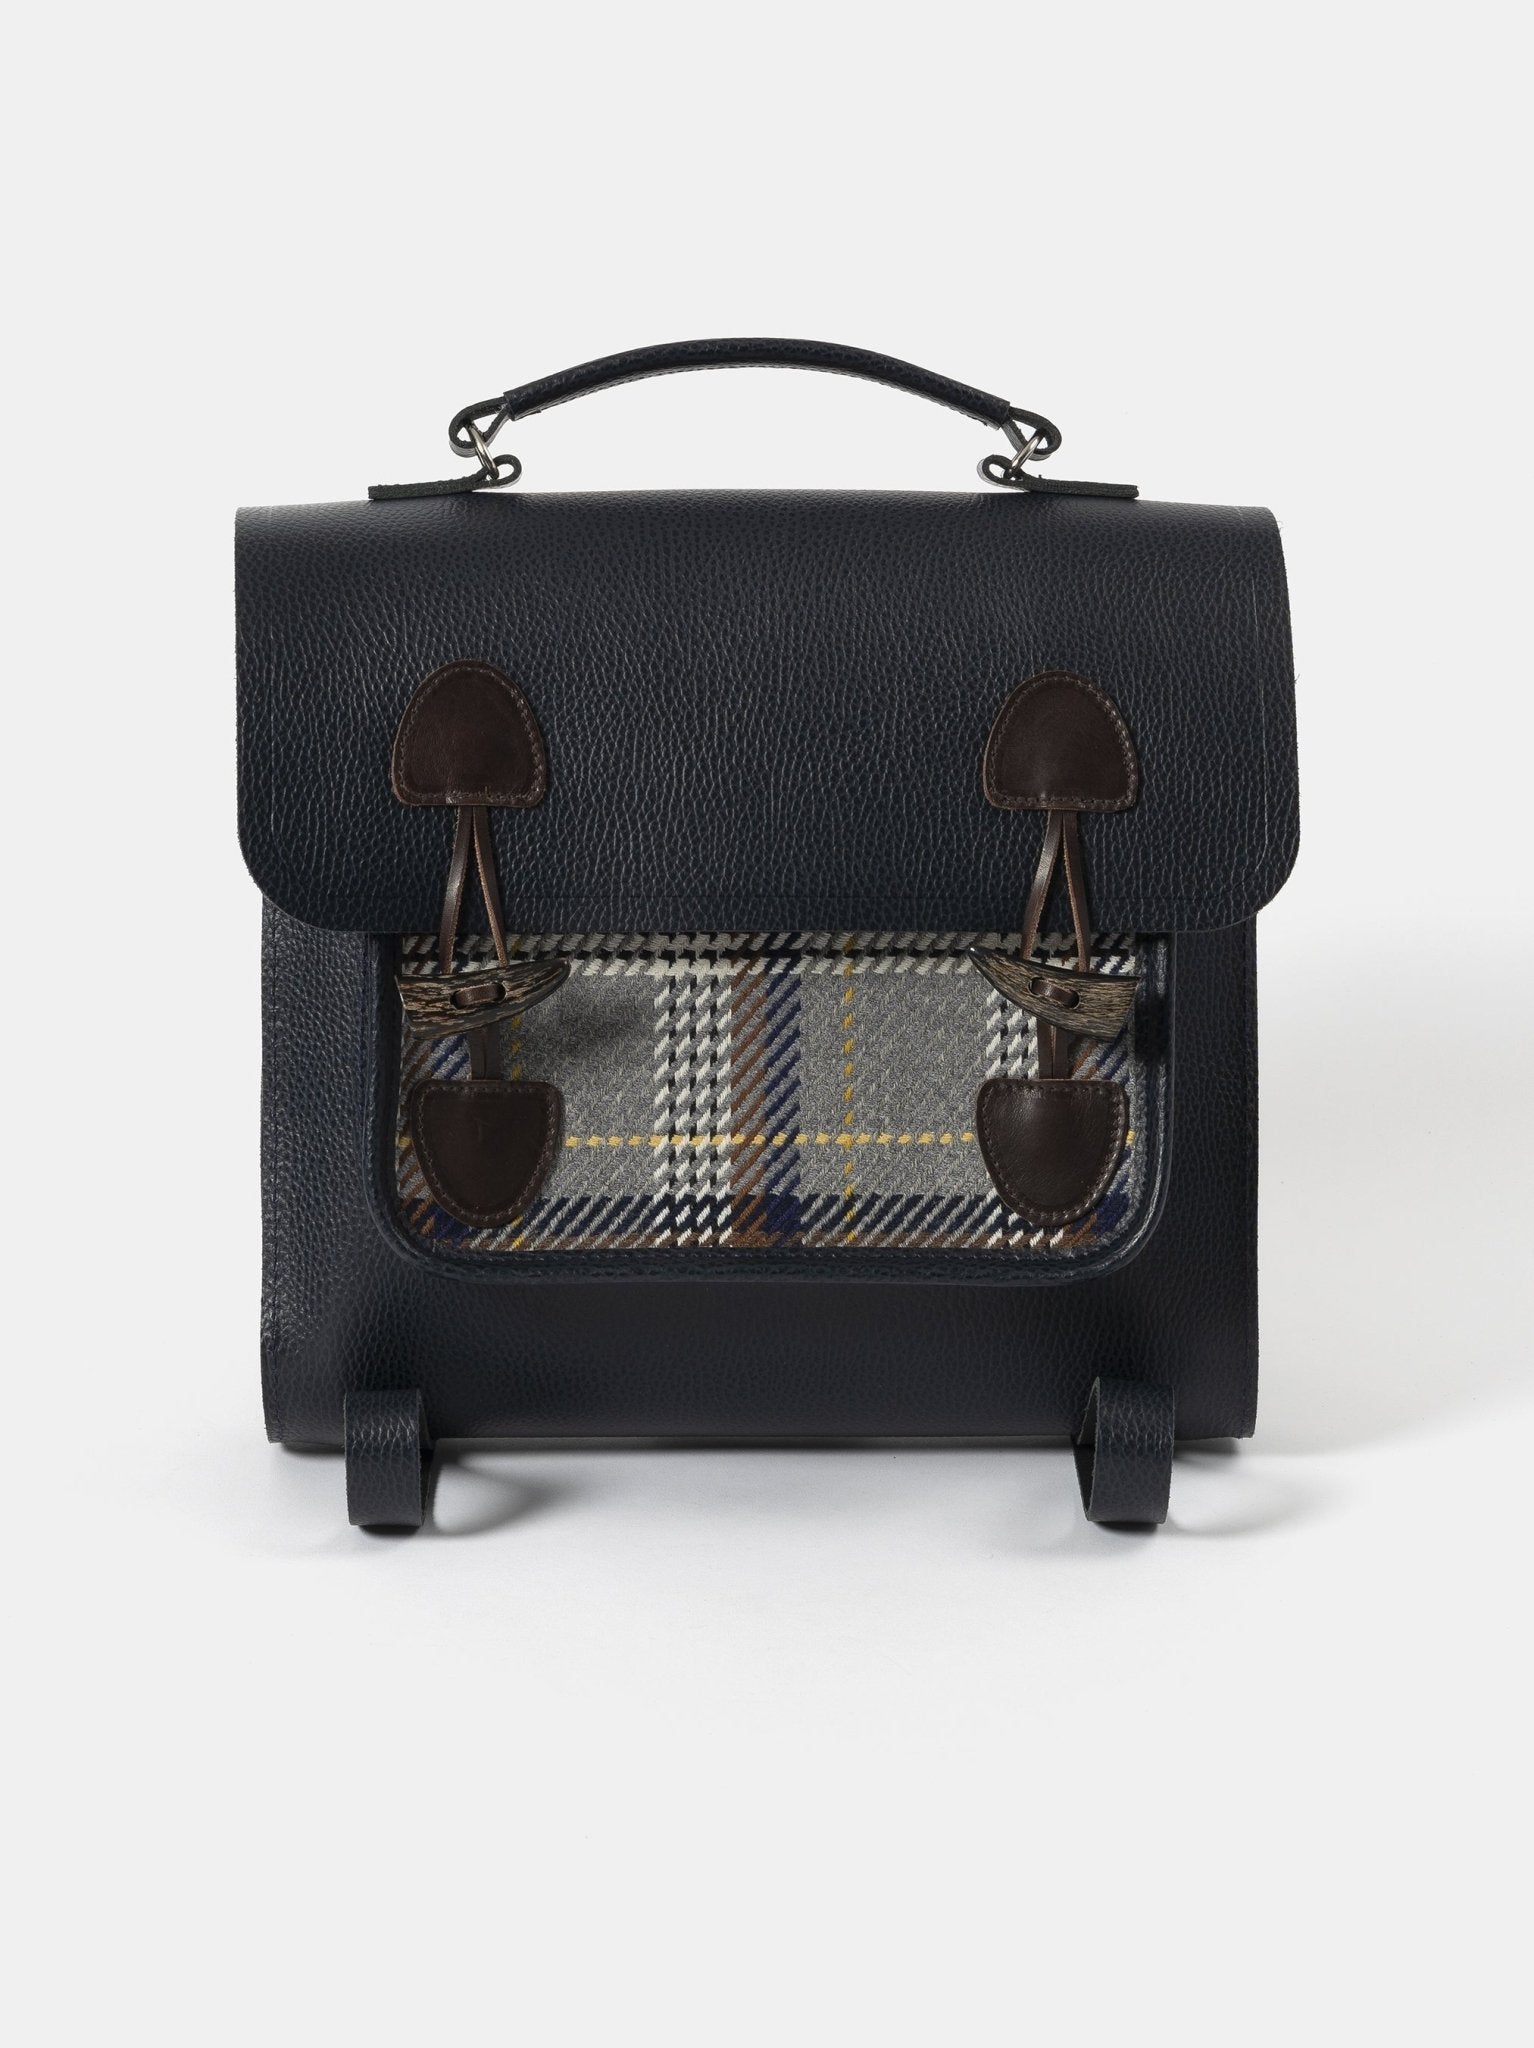 The Messenger Backpack - Navy Celtic Grain & Gloverall Tan Check - The Cambridge Satchel Company US Store